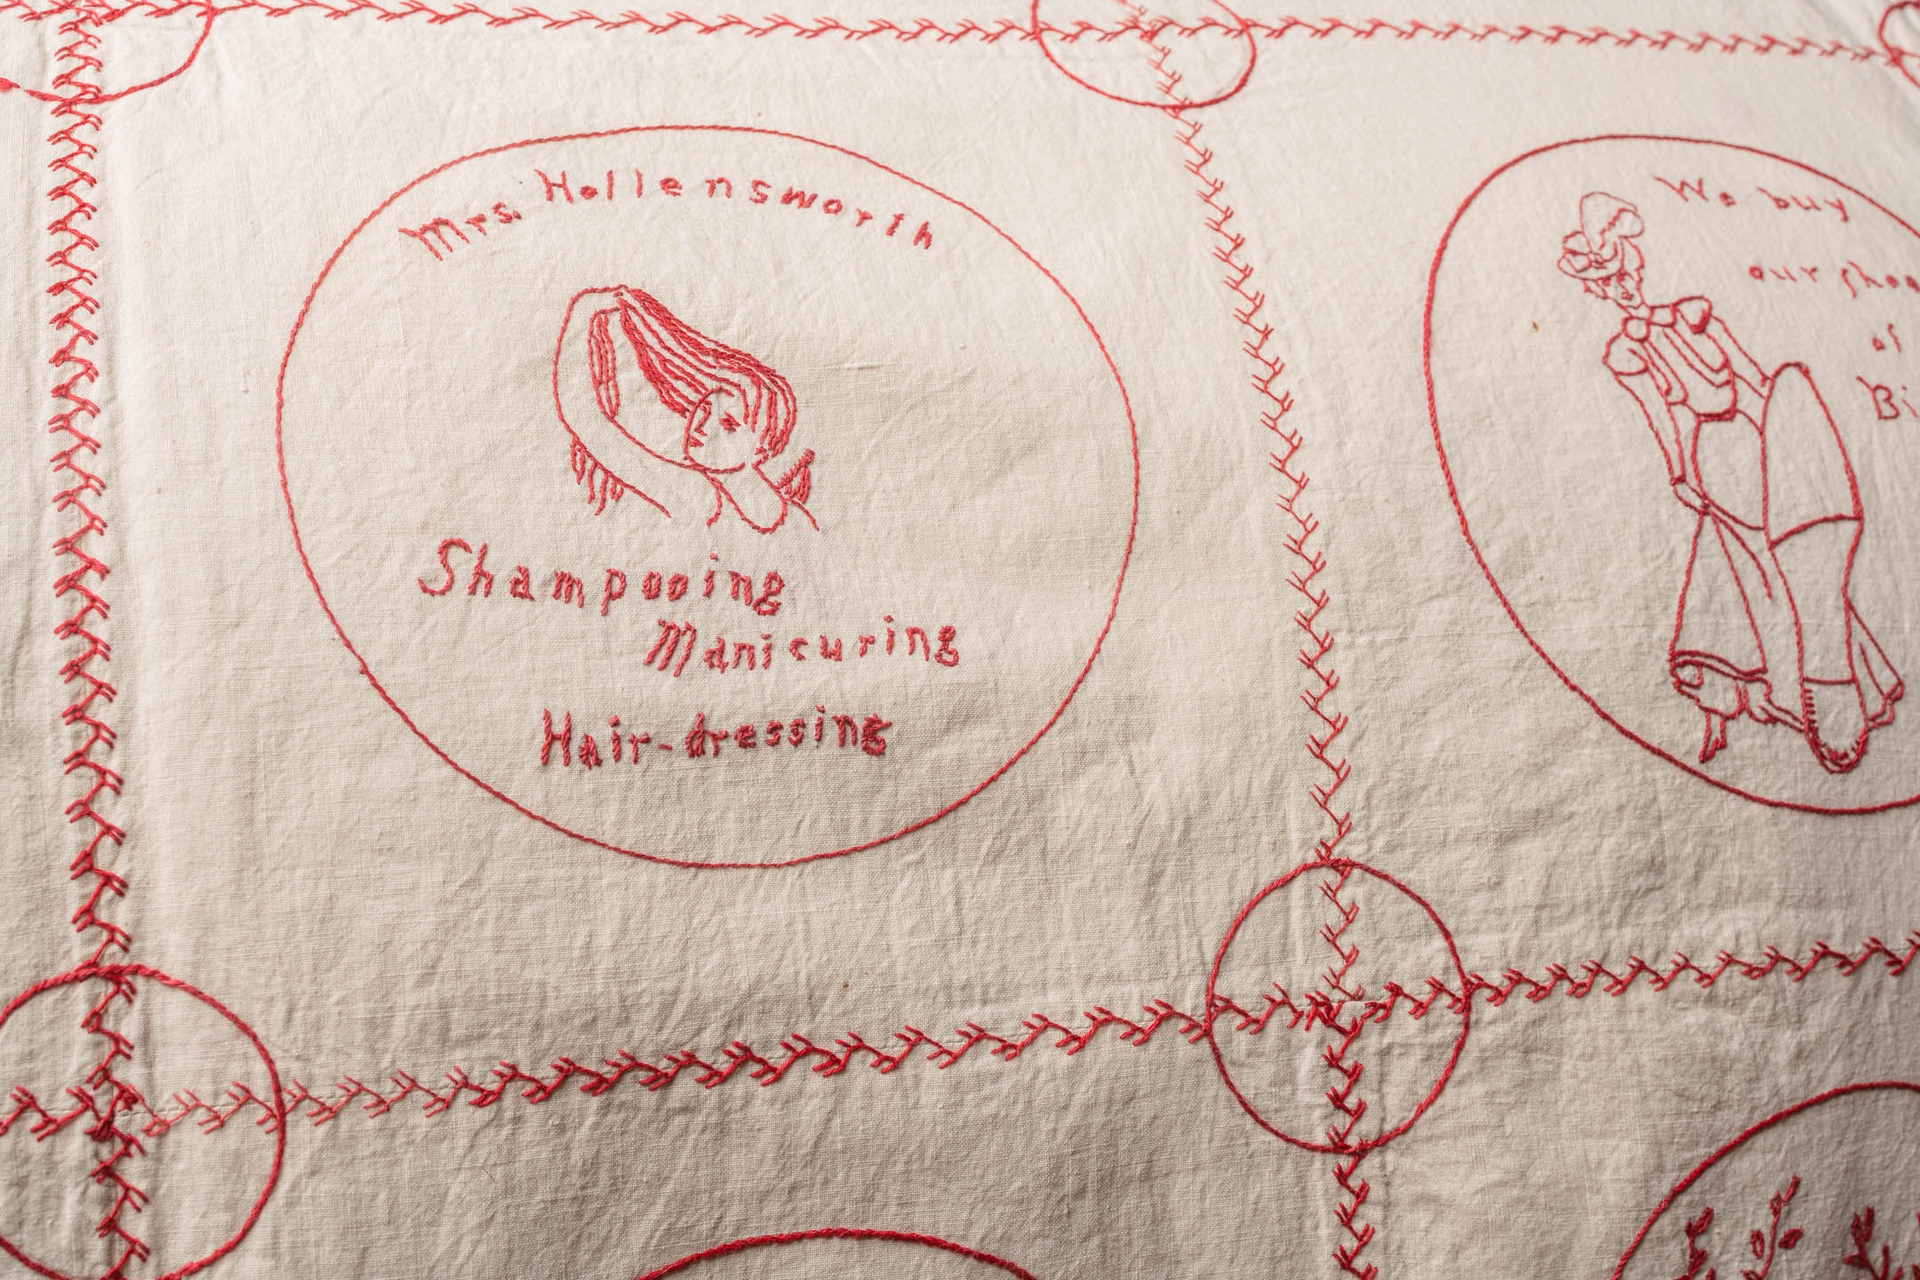 Embroidered on this redwork quilt made by Teresa Wagg in 1900 is "Mrs. Hollensworth Shampooing Manicuring Hair-Dressing" promoting a Black-owned business. Business owner Emma Hollensworth also worked at the Appleton Children's Home as a matron. Her daughter, Gertrude Louise Hollensworth, was a school teacher. They were part of the "Black Aristrocracy" of Appleton.